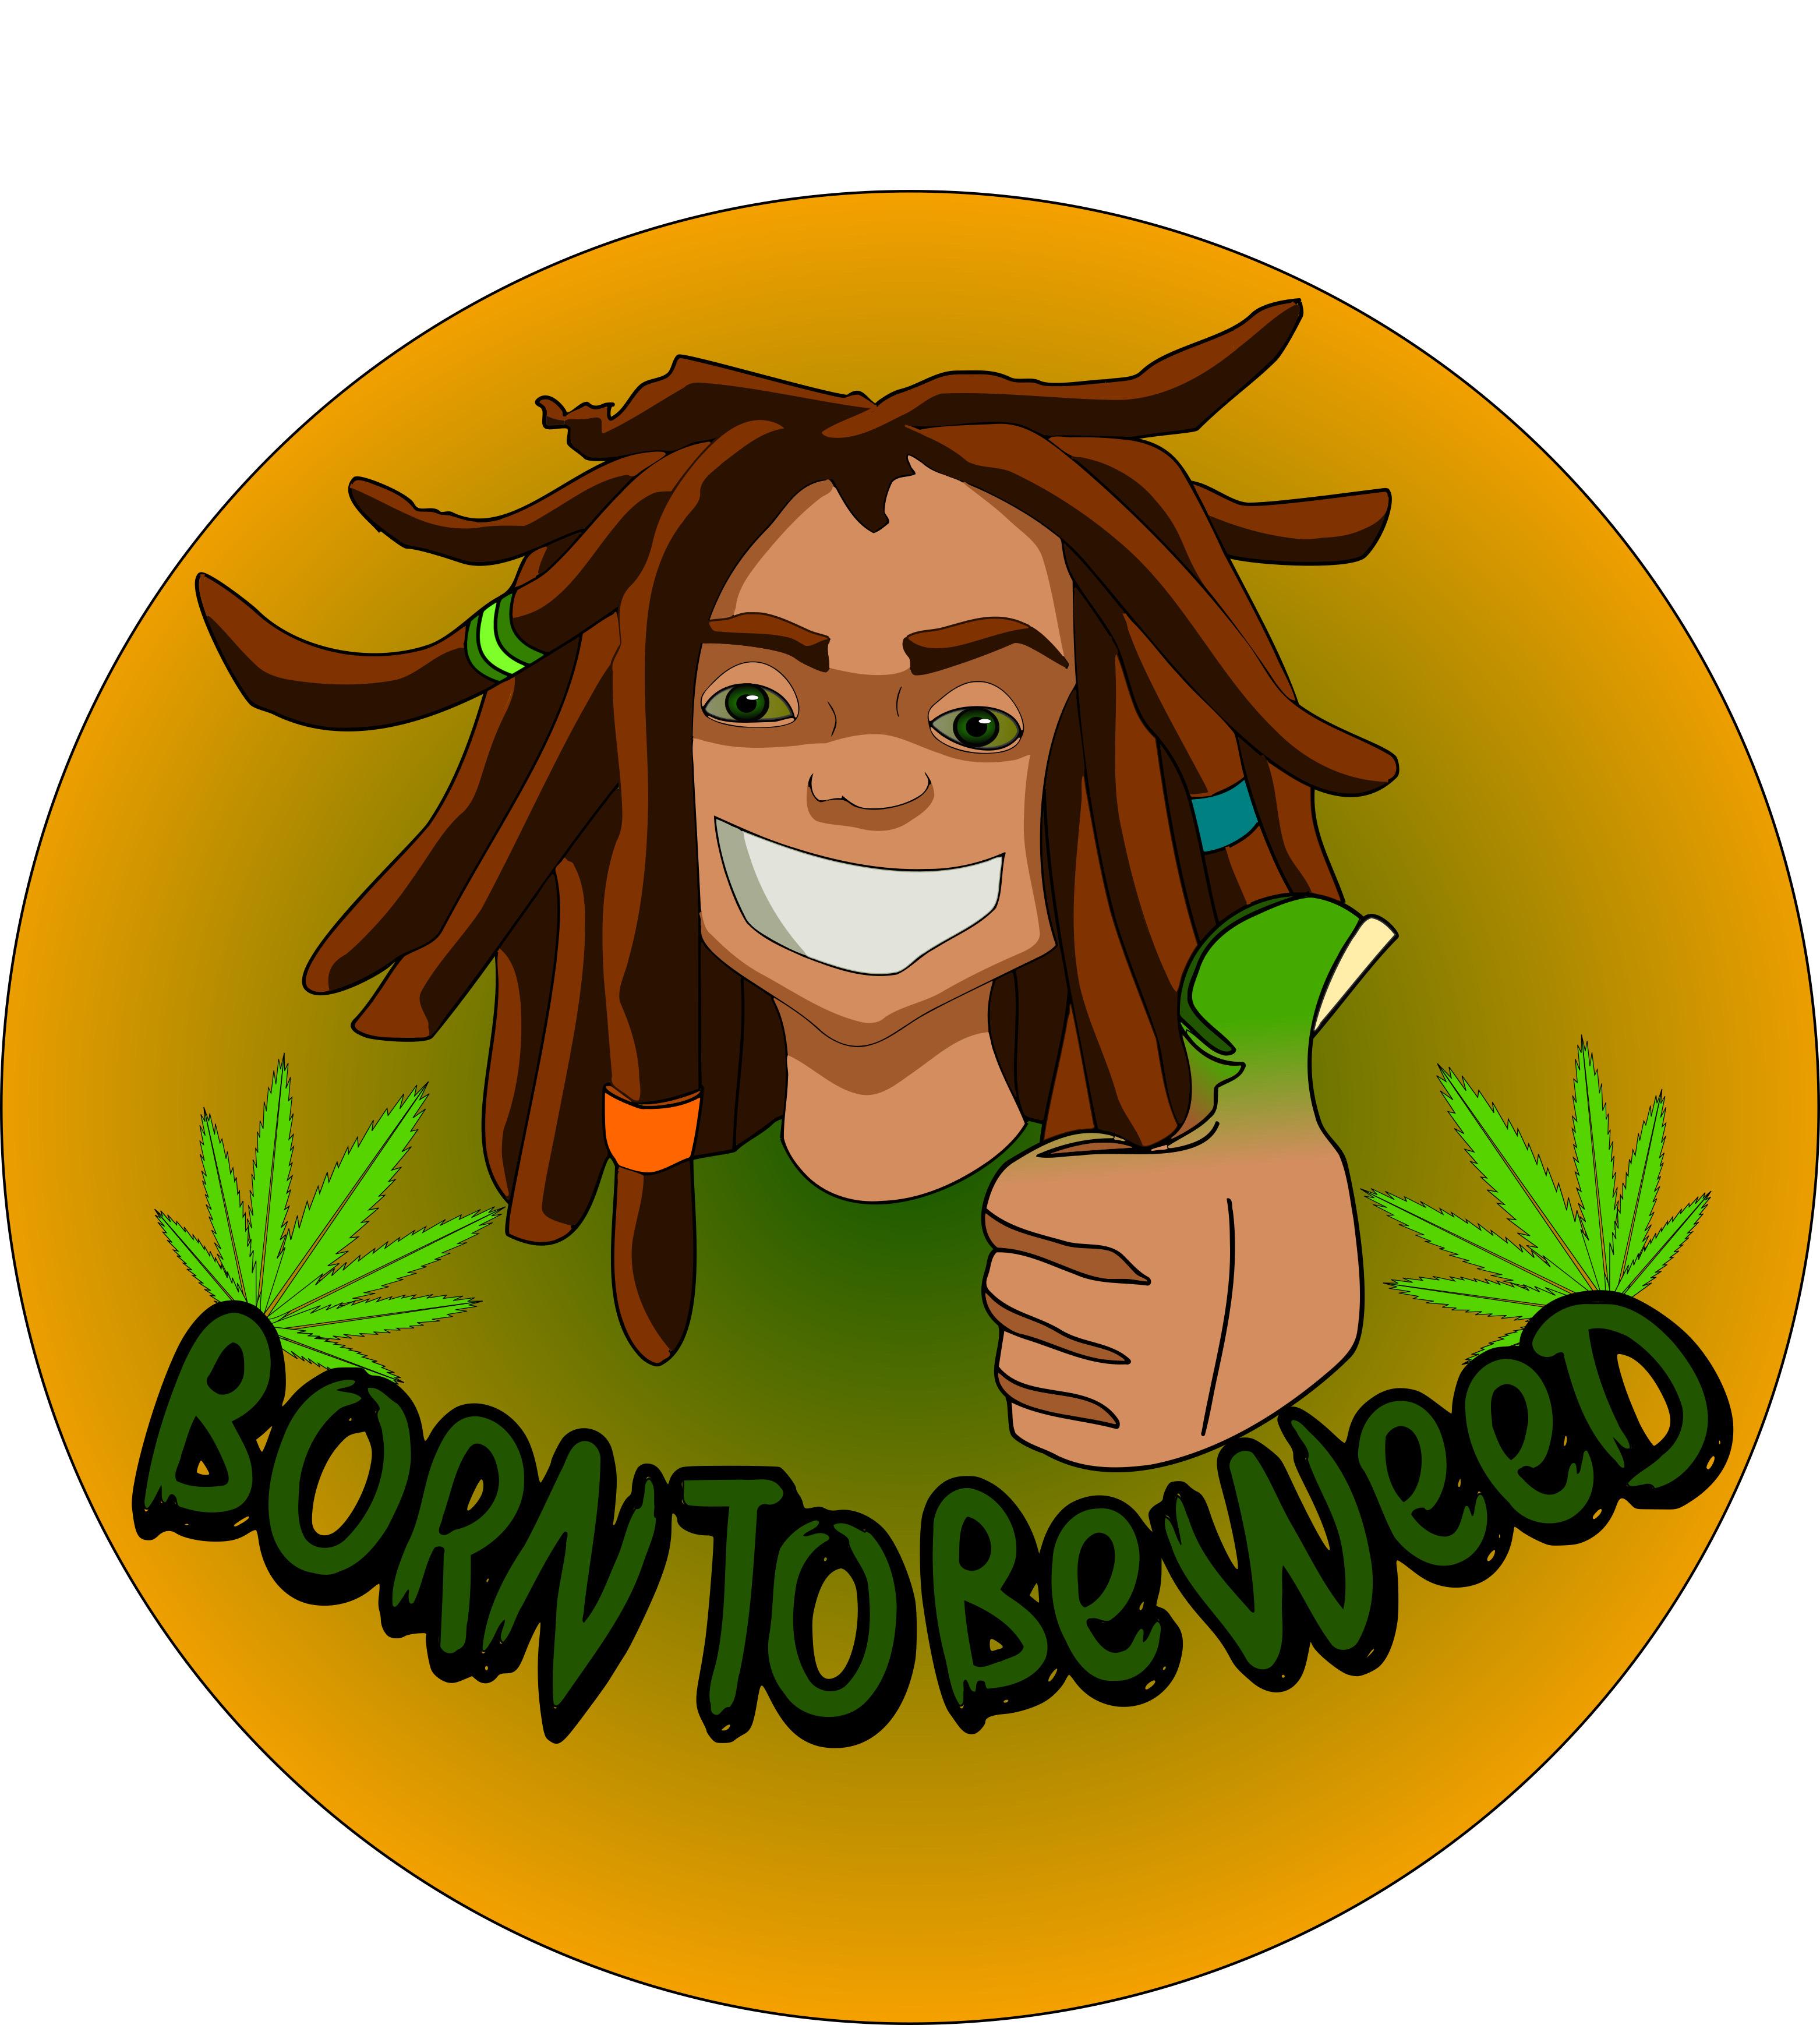 Born To be weed